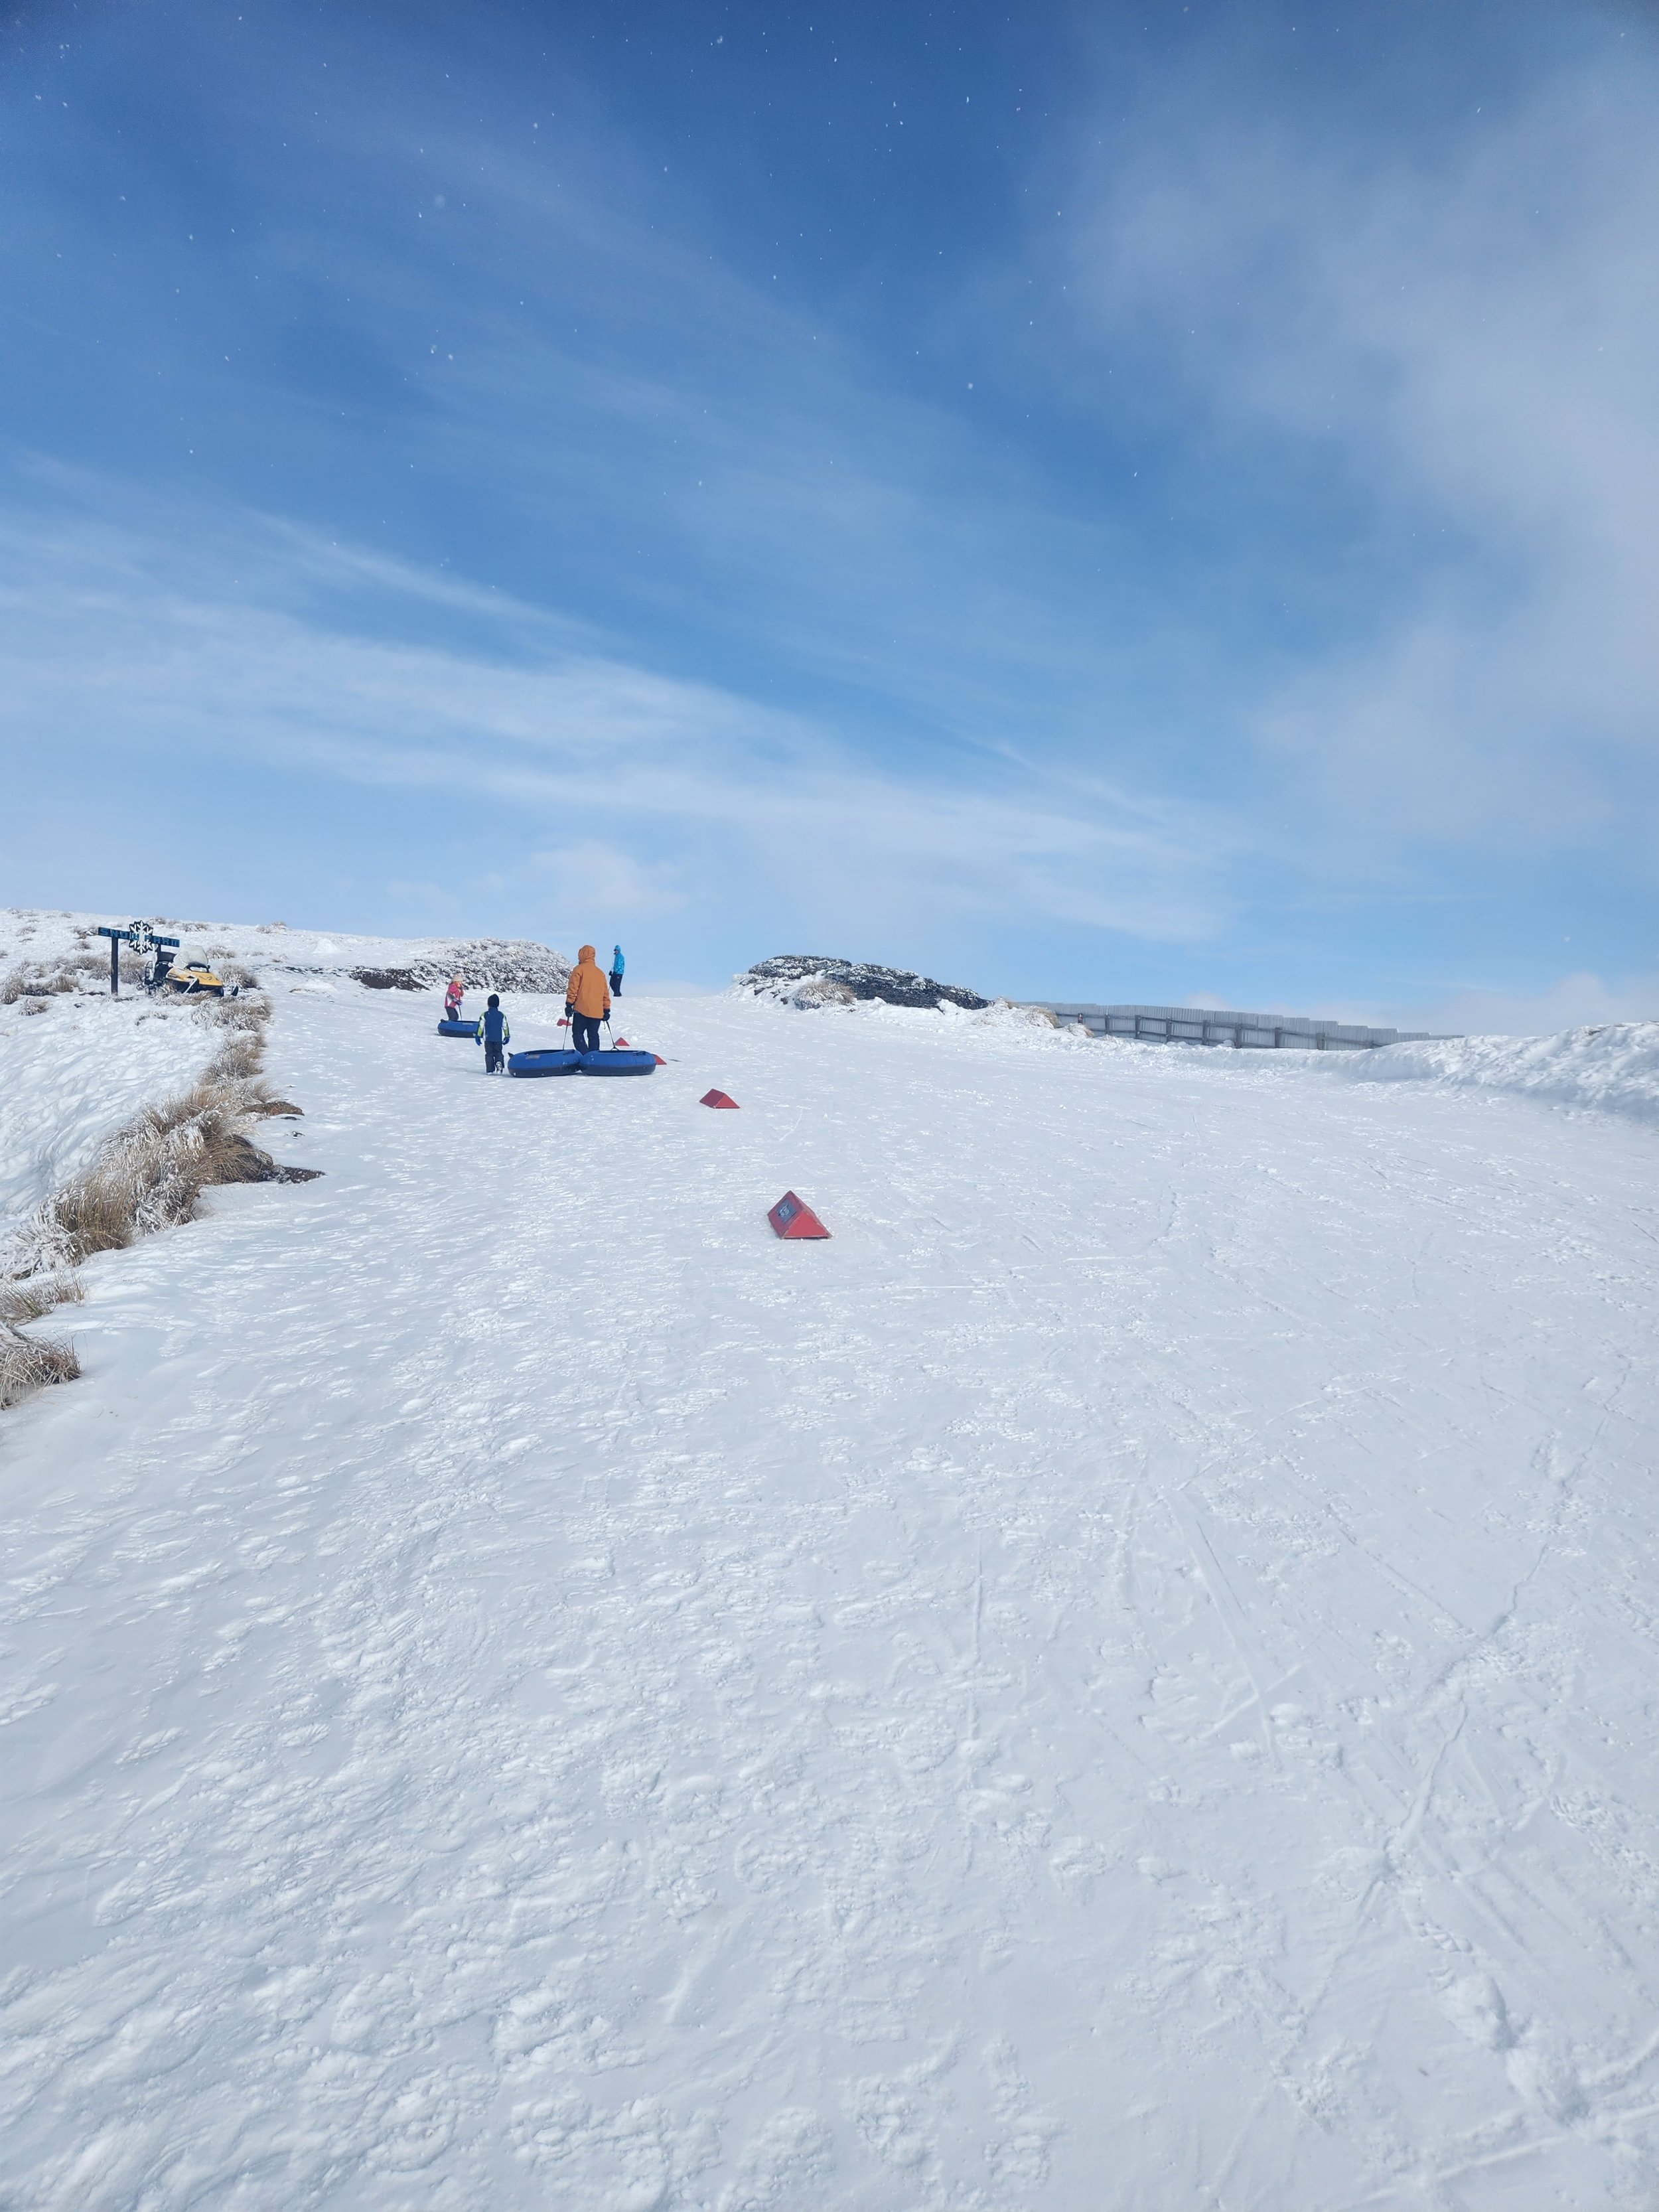 The tube ride at the Snow Farm